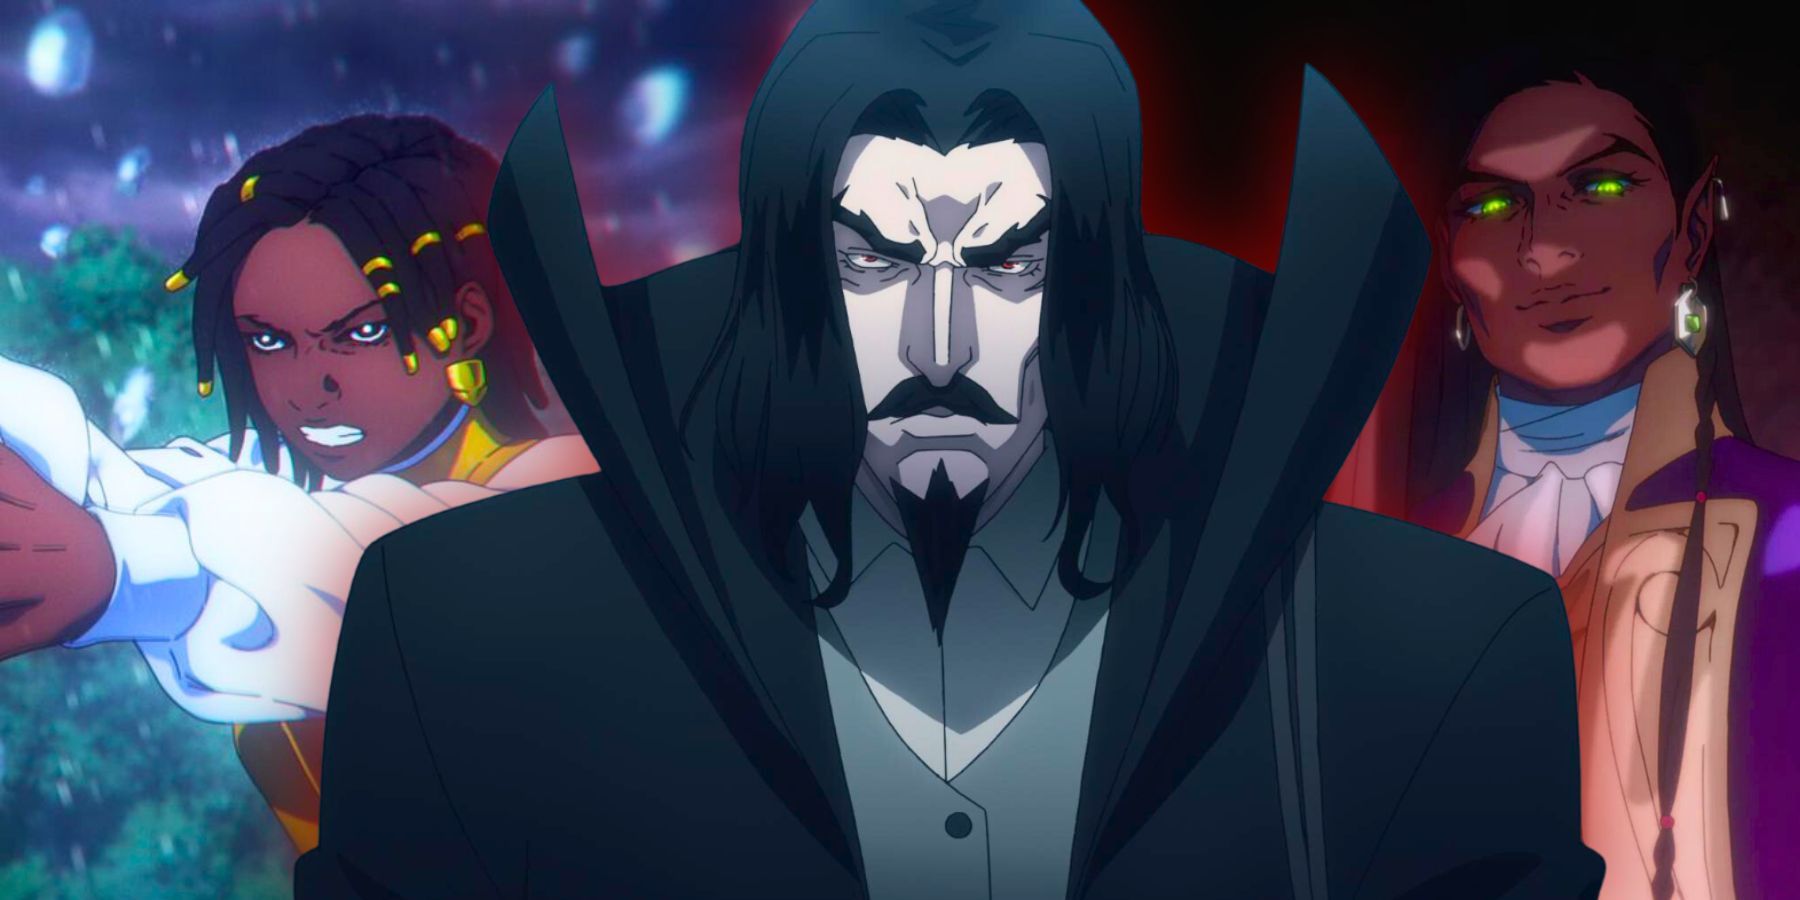 Dracula from Castlevania with Castlevania Nocturne characters in the background